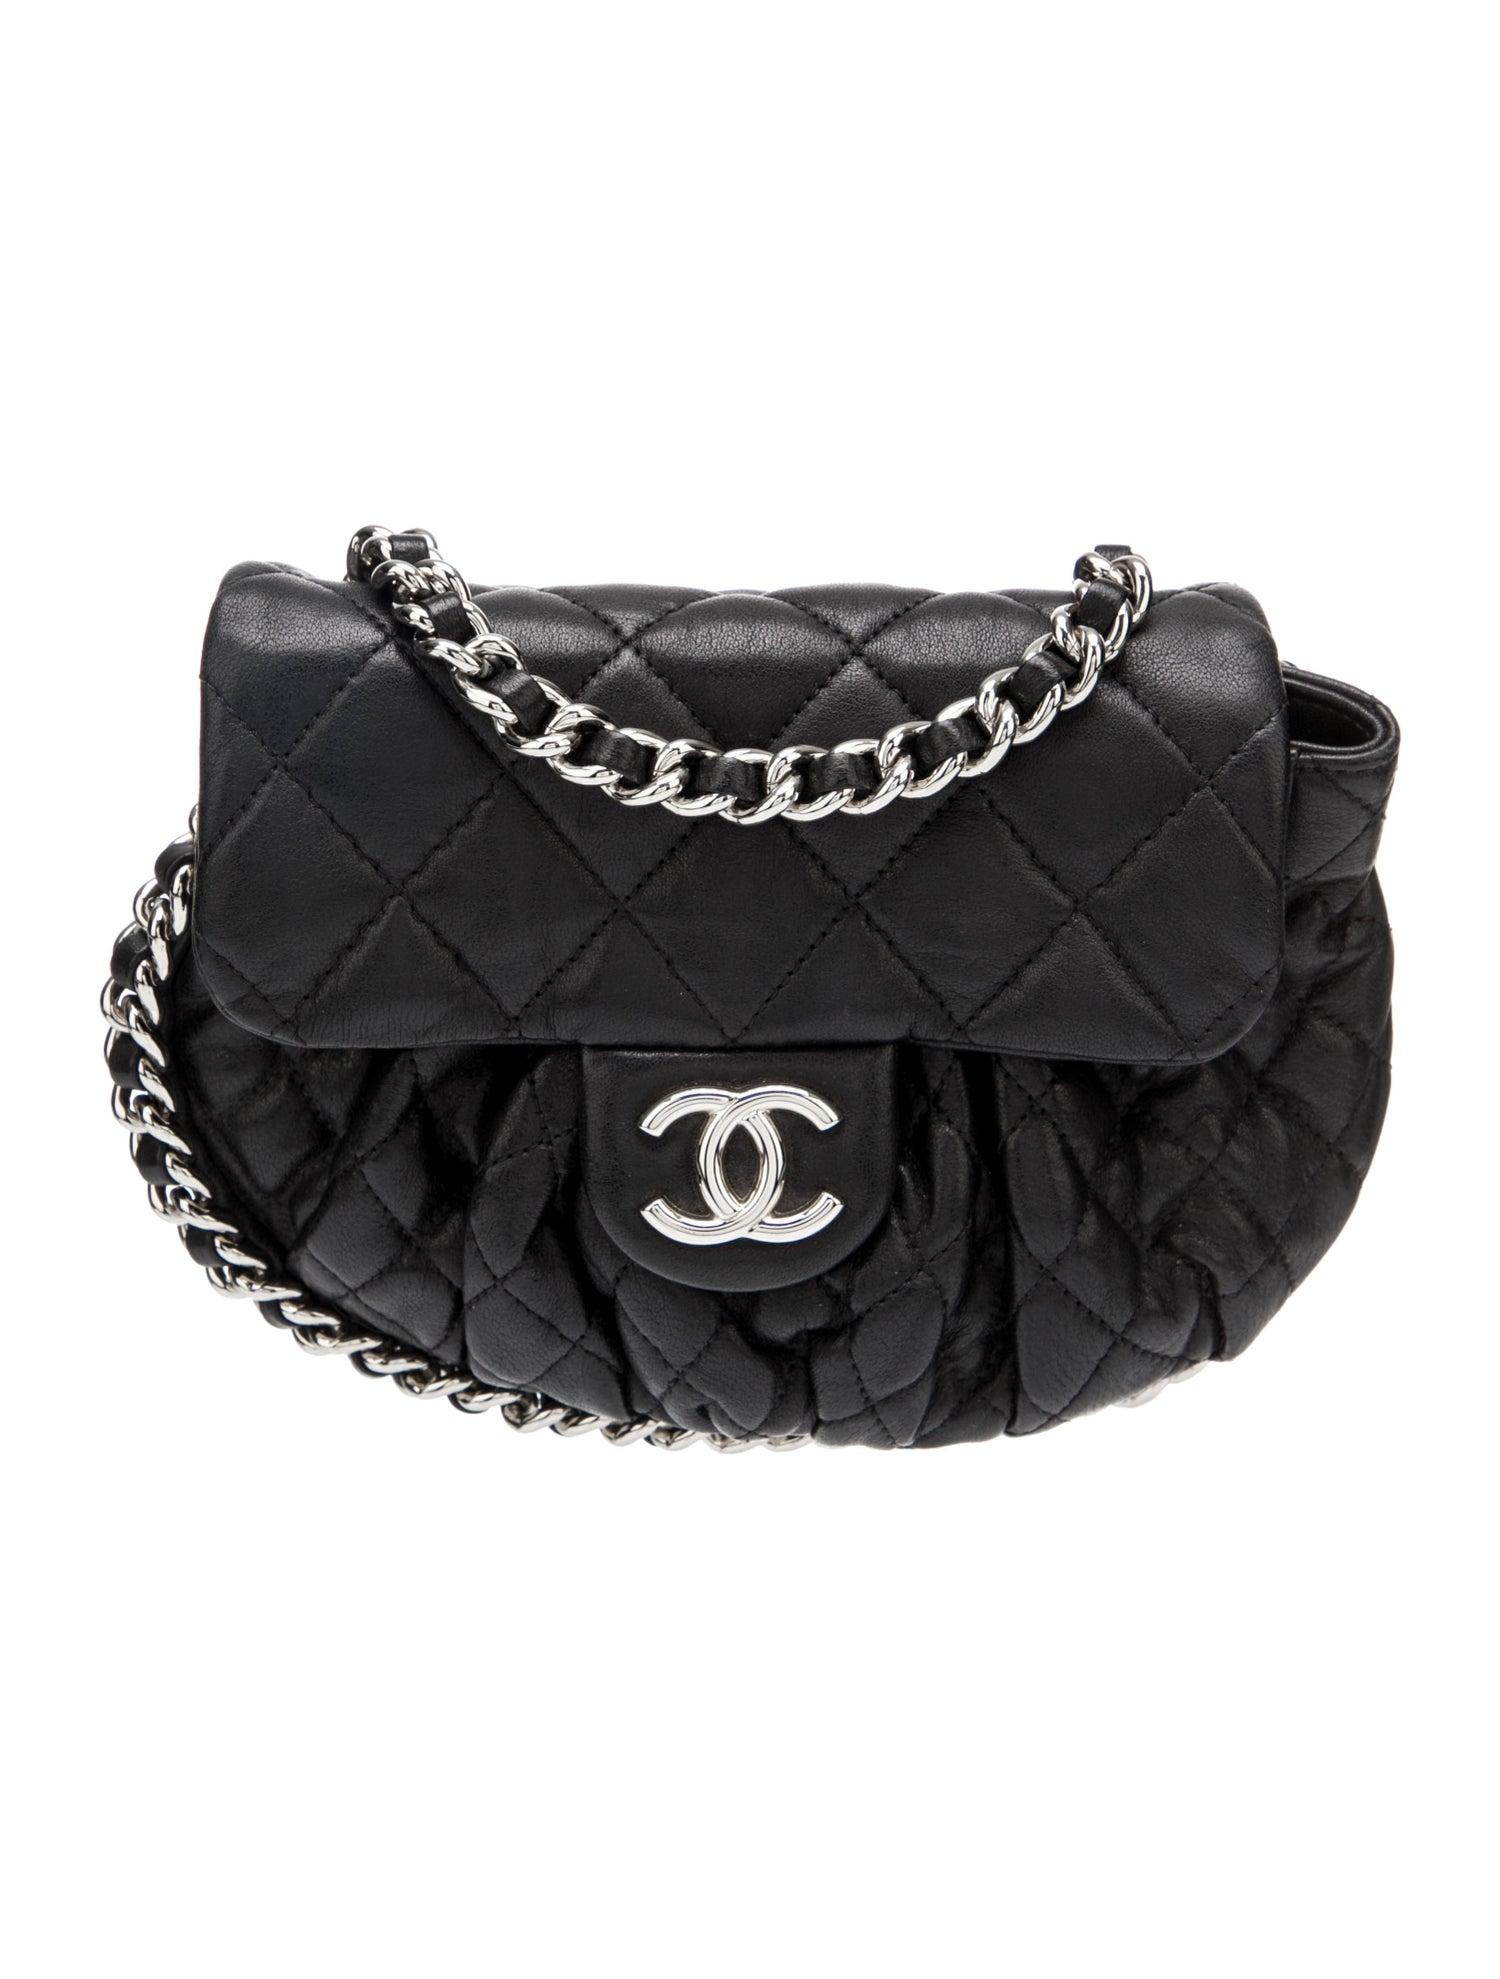 Chanel 2012 Small Mini Quilted Black Limited Edition Crossbody Classic Flap Bag  In Good Condition For Sale In Miami, FL